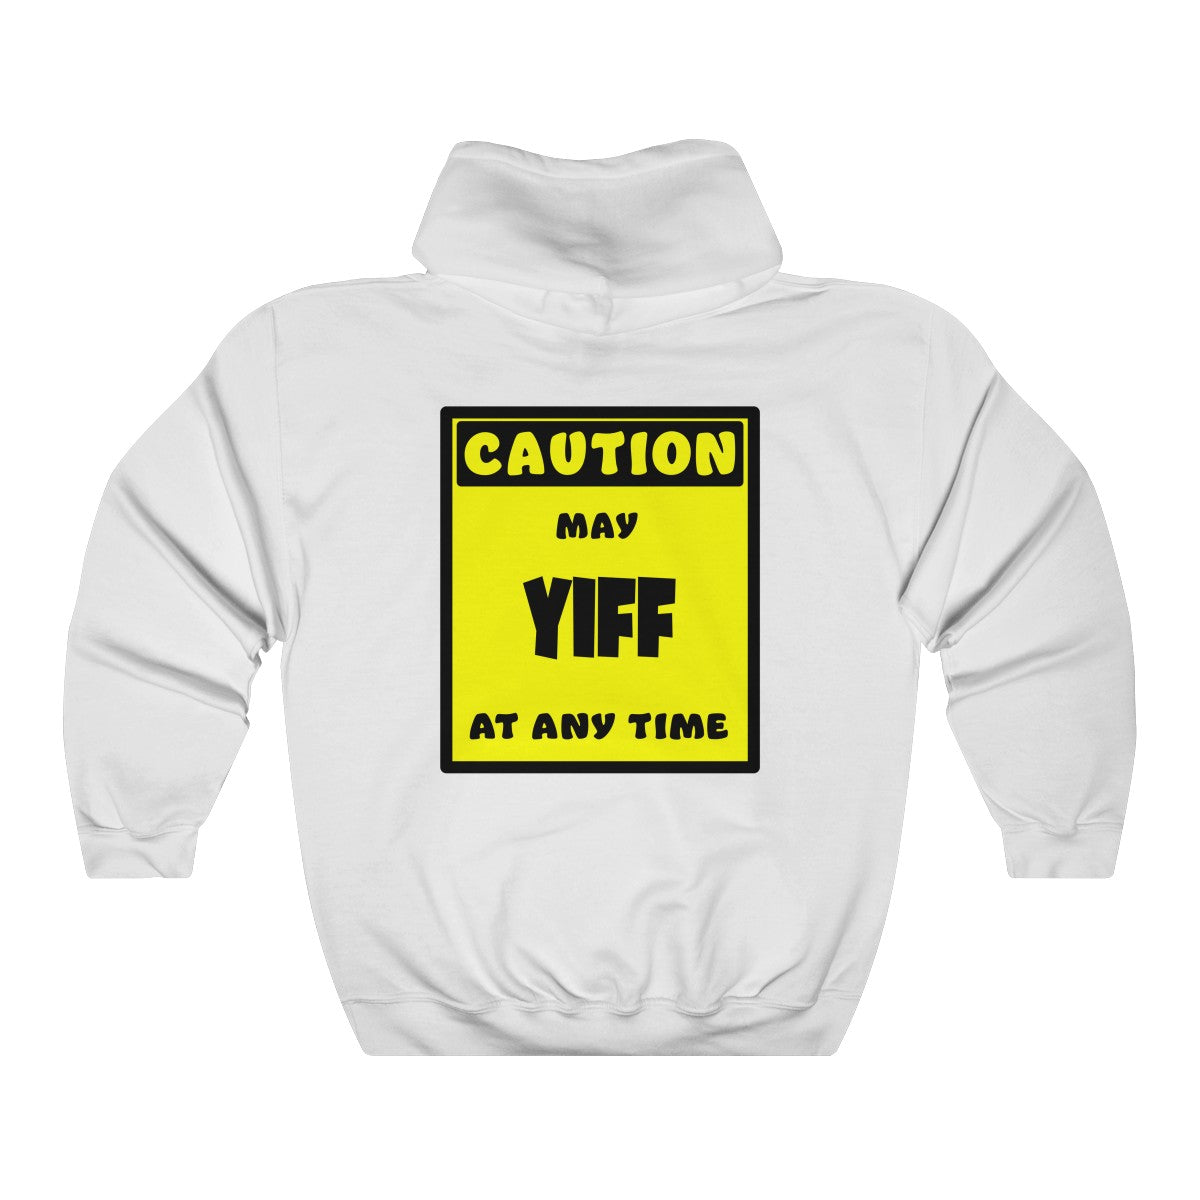 CAUTION! May YIFF at any time! - Hoodie Hoodie AFLT-Whootorca White S 